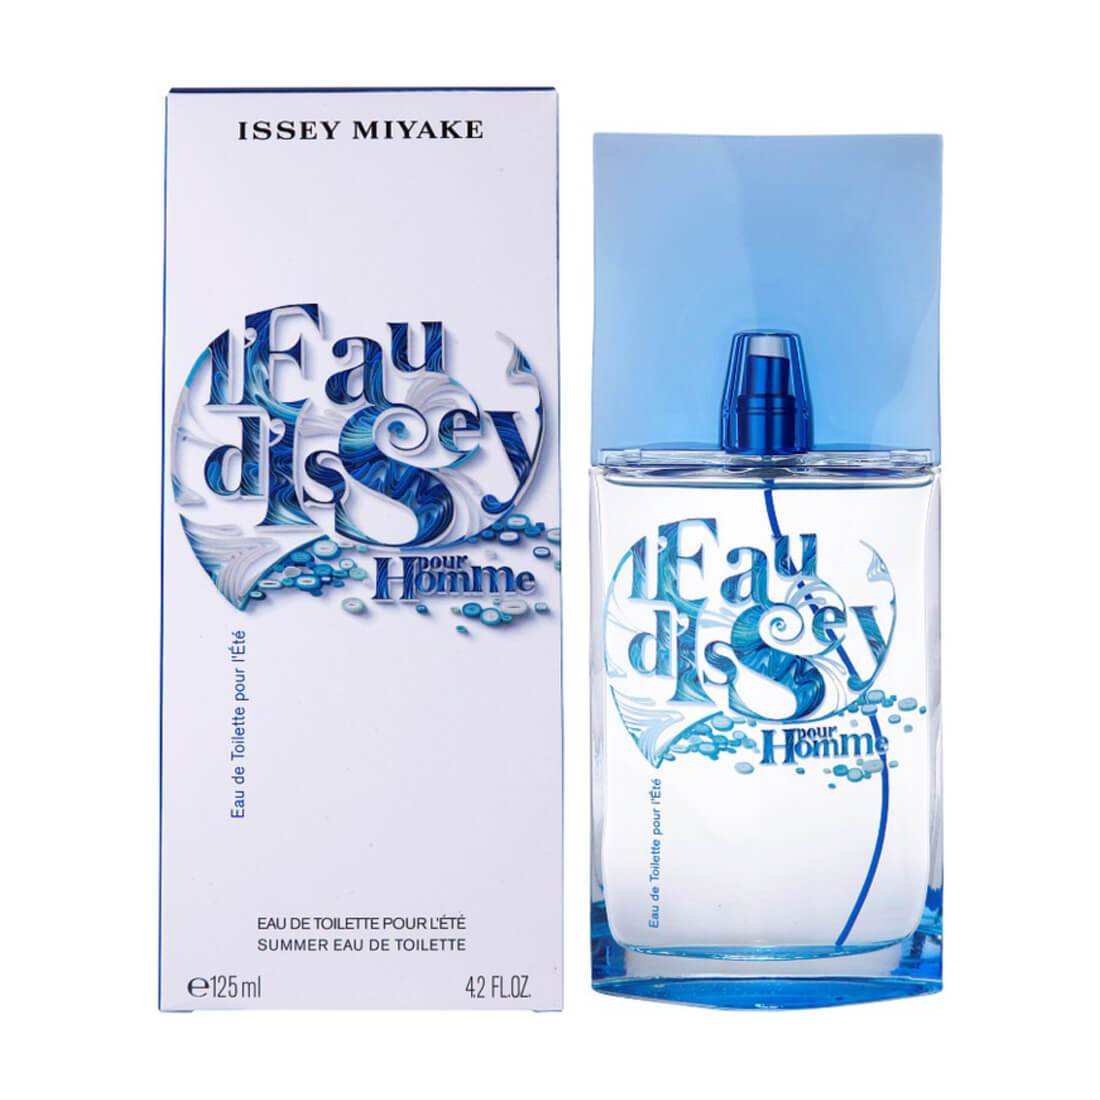 Issey Miyake Summer 2015 Pour L'ete EDT Perfume For Men - 125ml